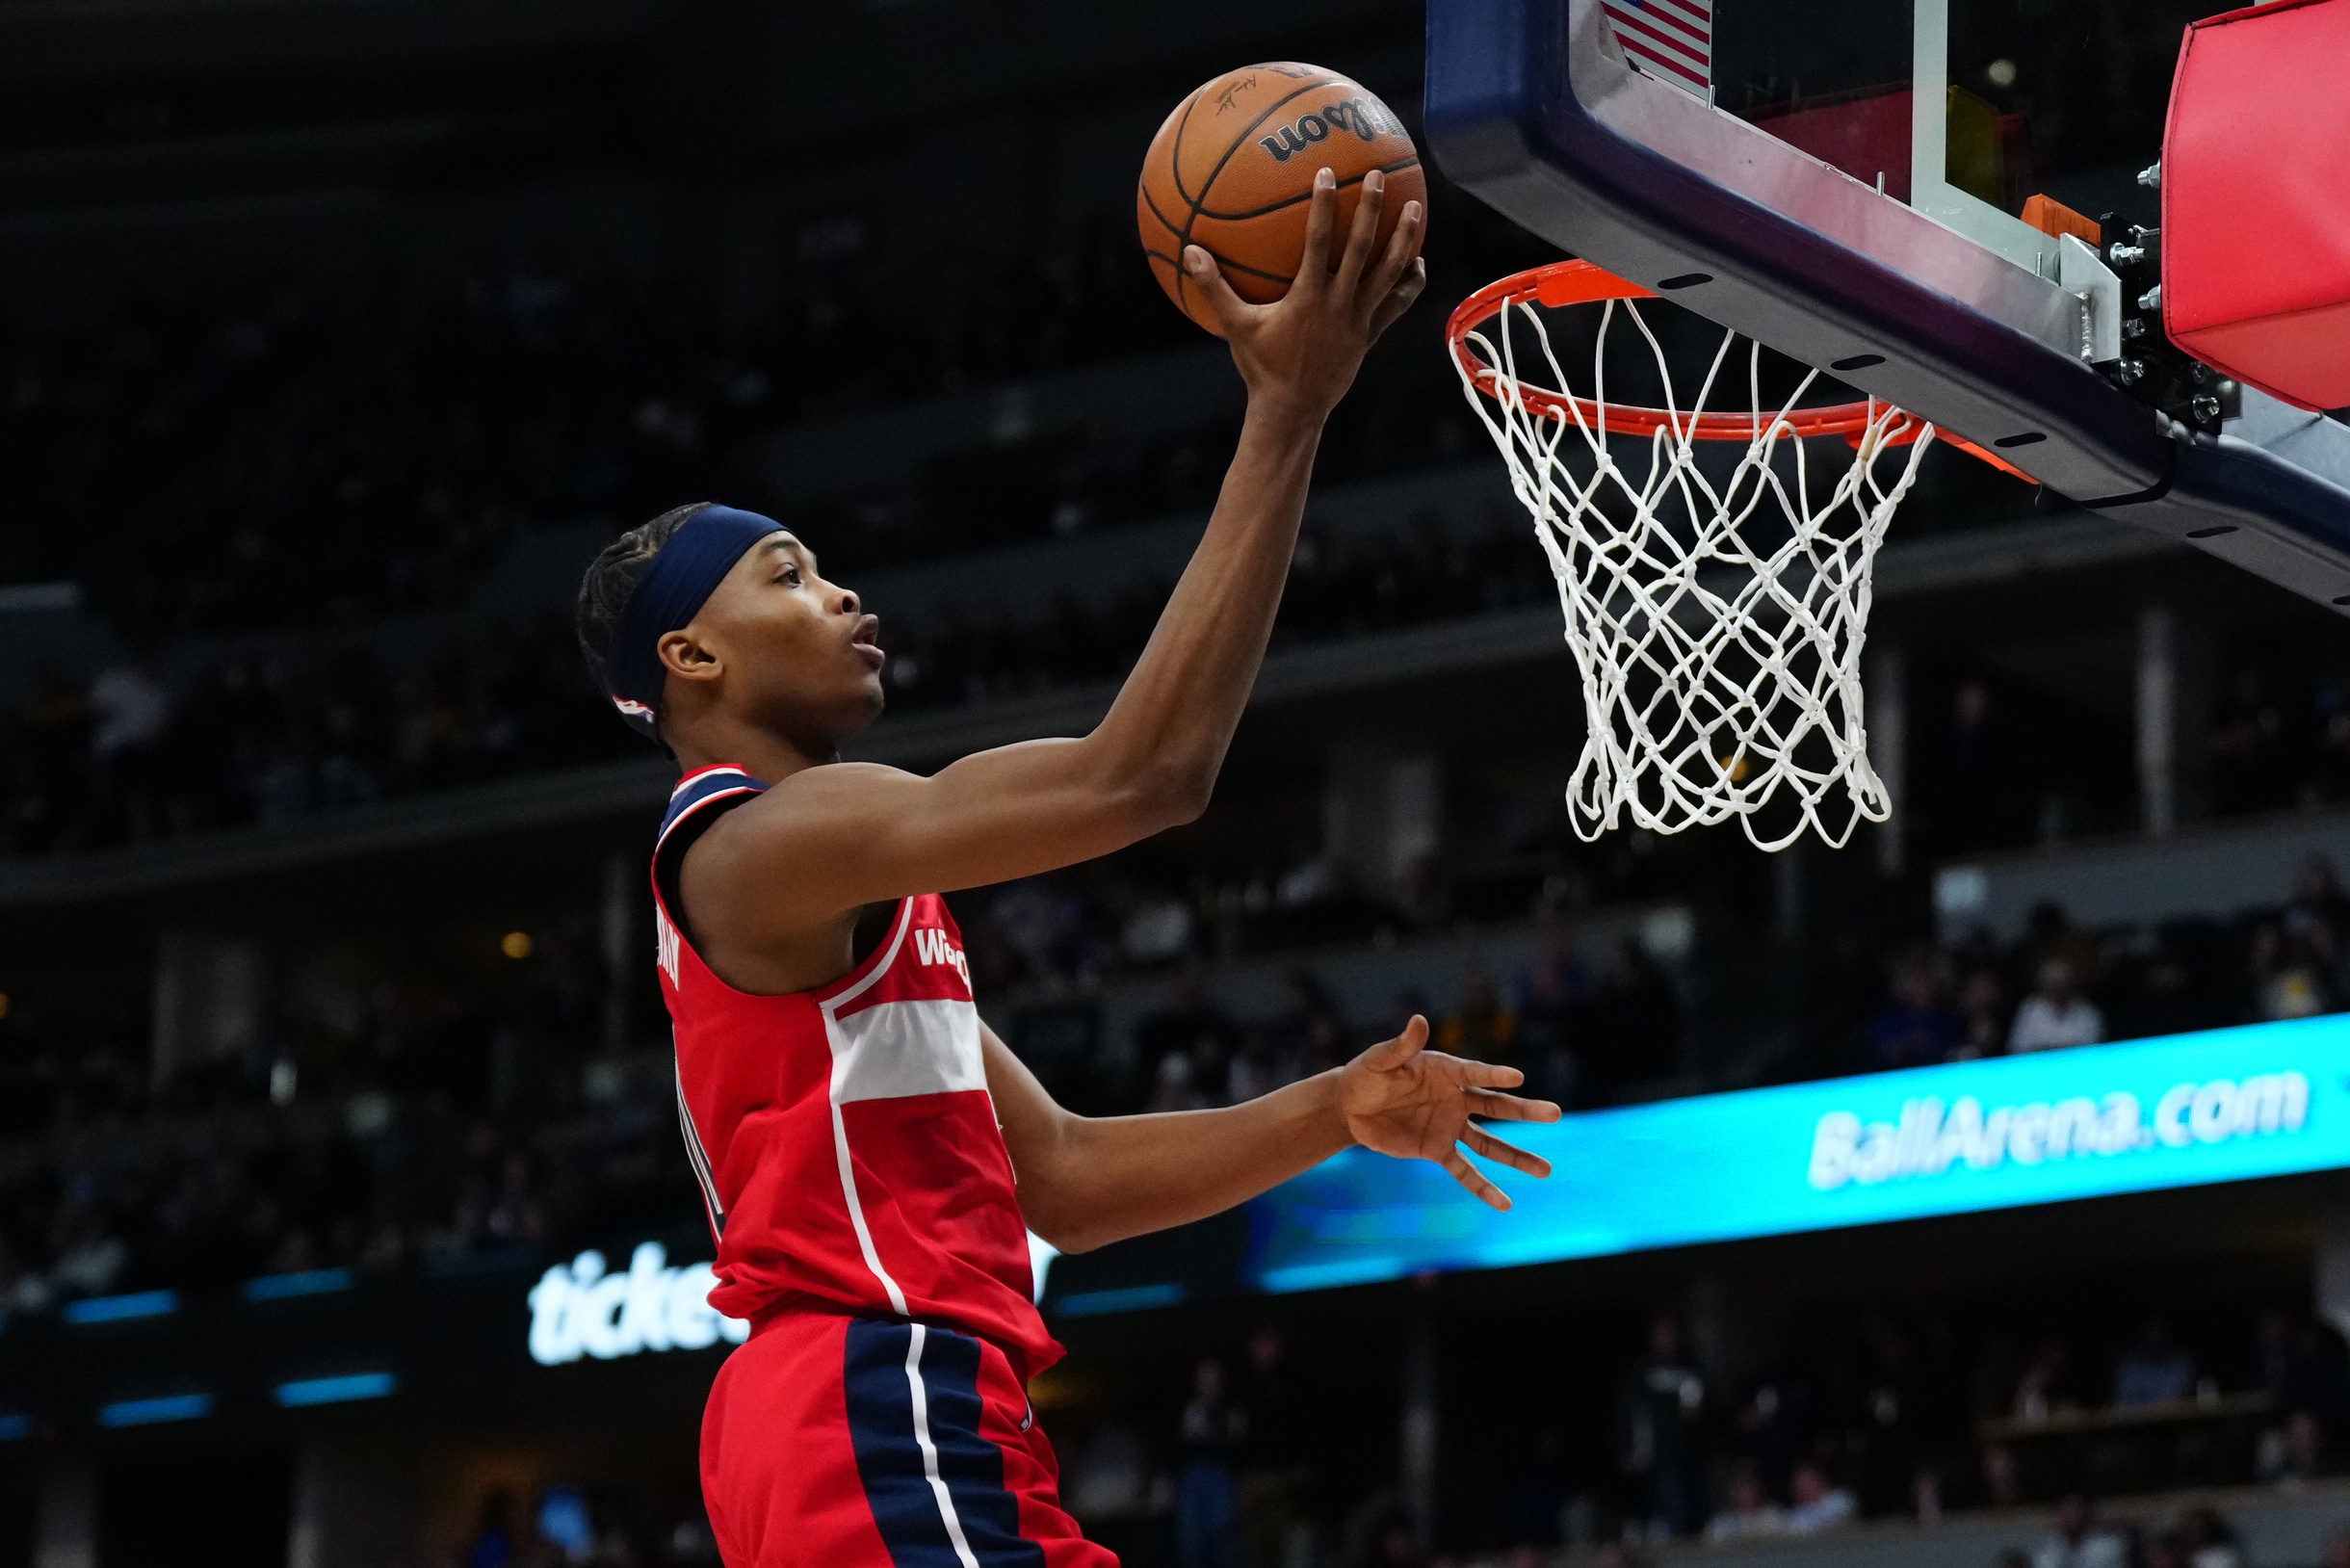 Bilal Coulibaly had an intriguing rookie season with the Wizards.